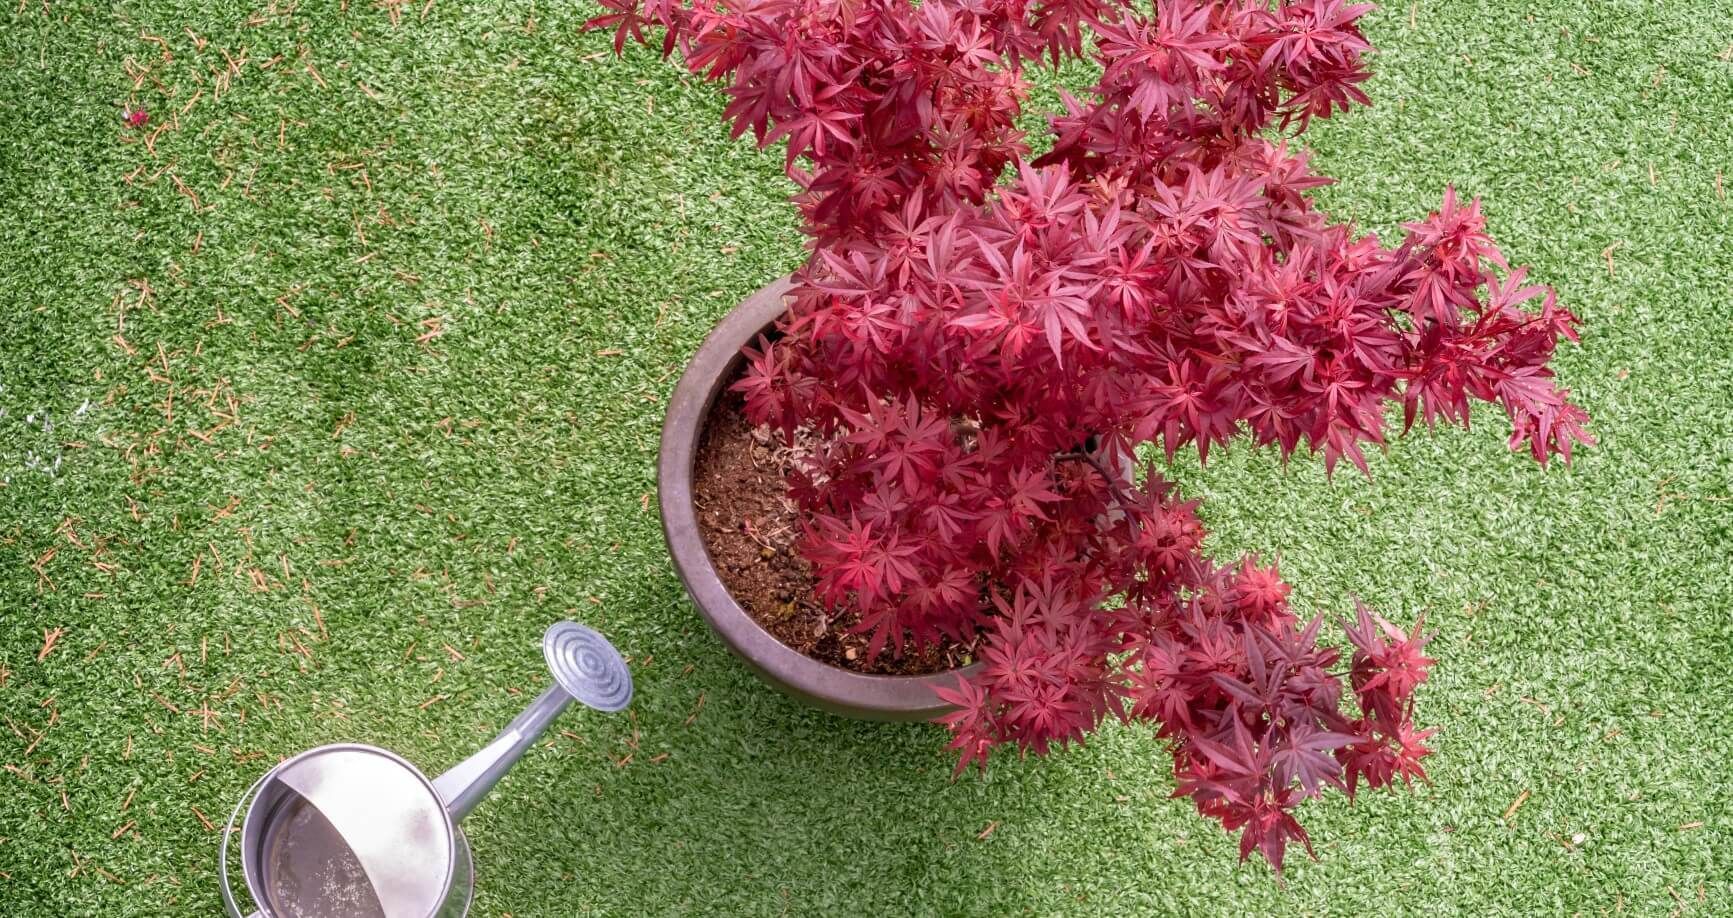 Top view of a watering can and a young Japanese maple tree in a flower pot